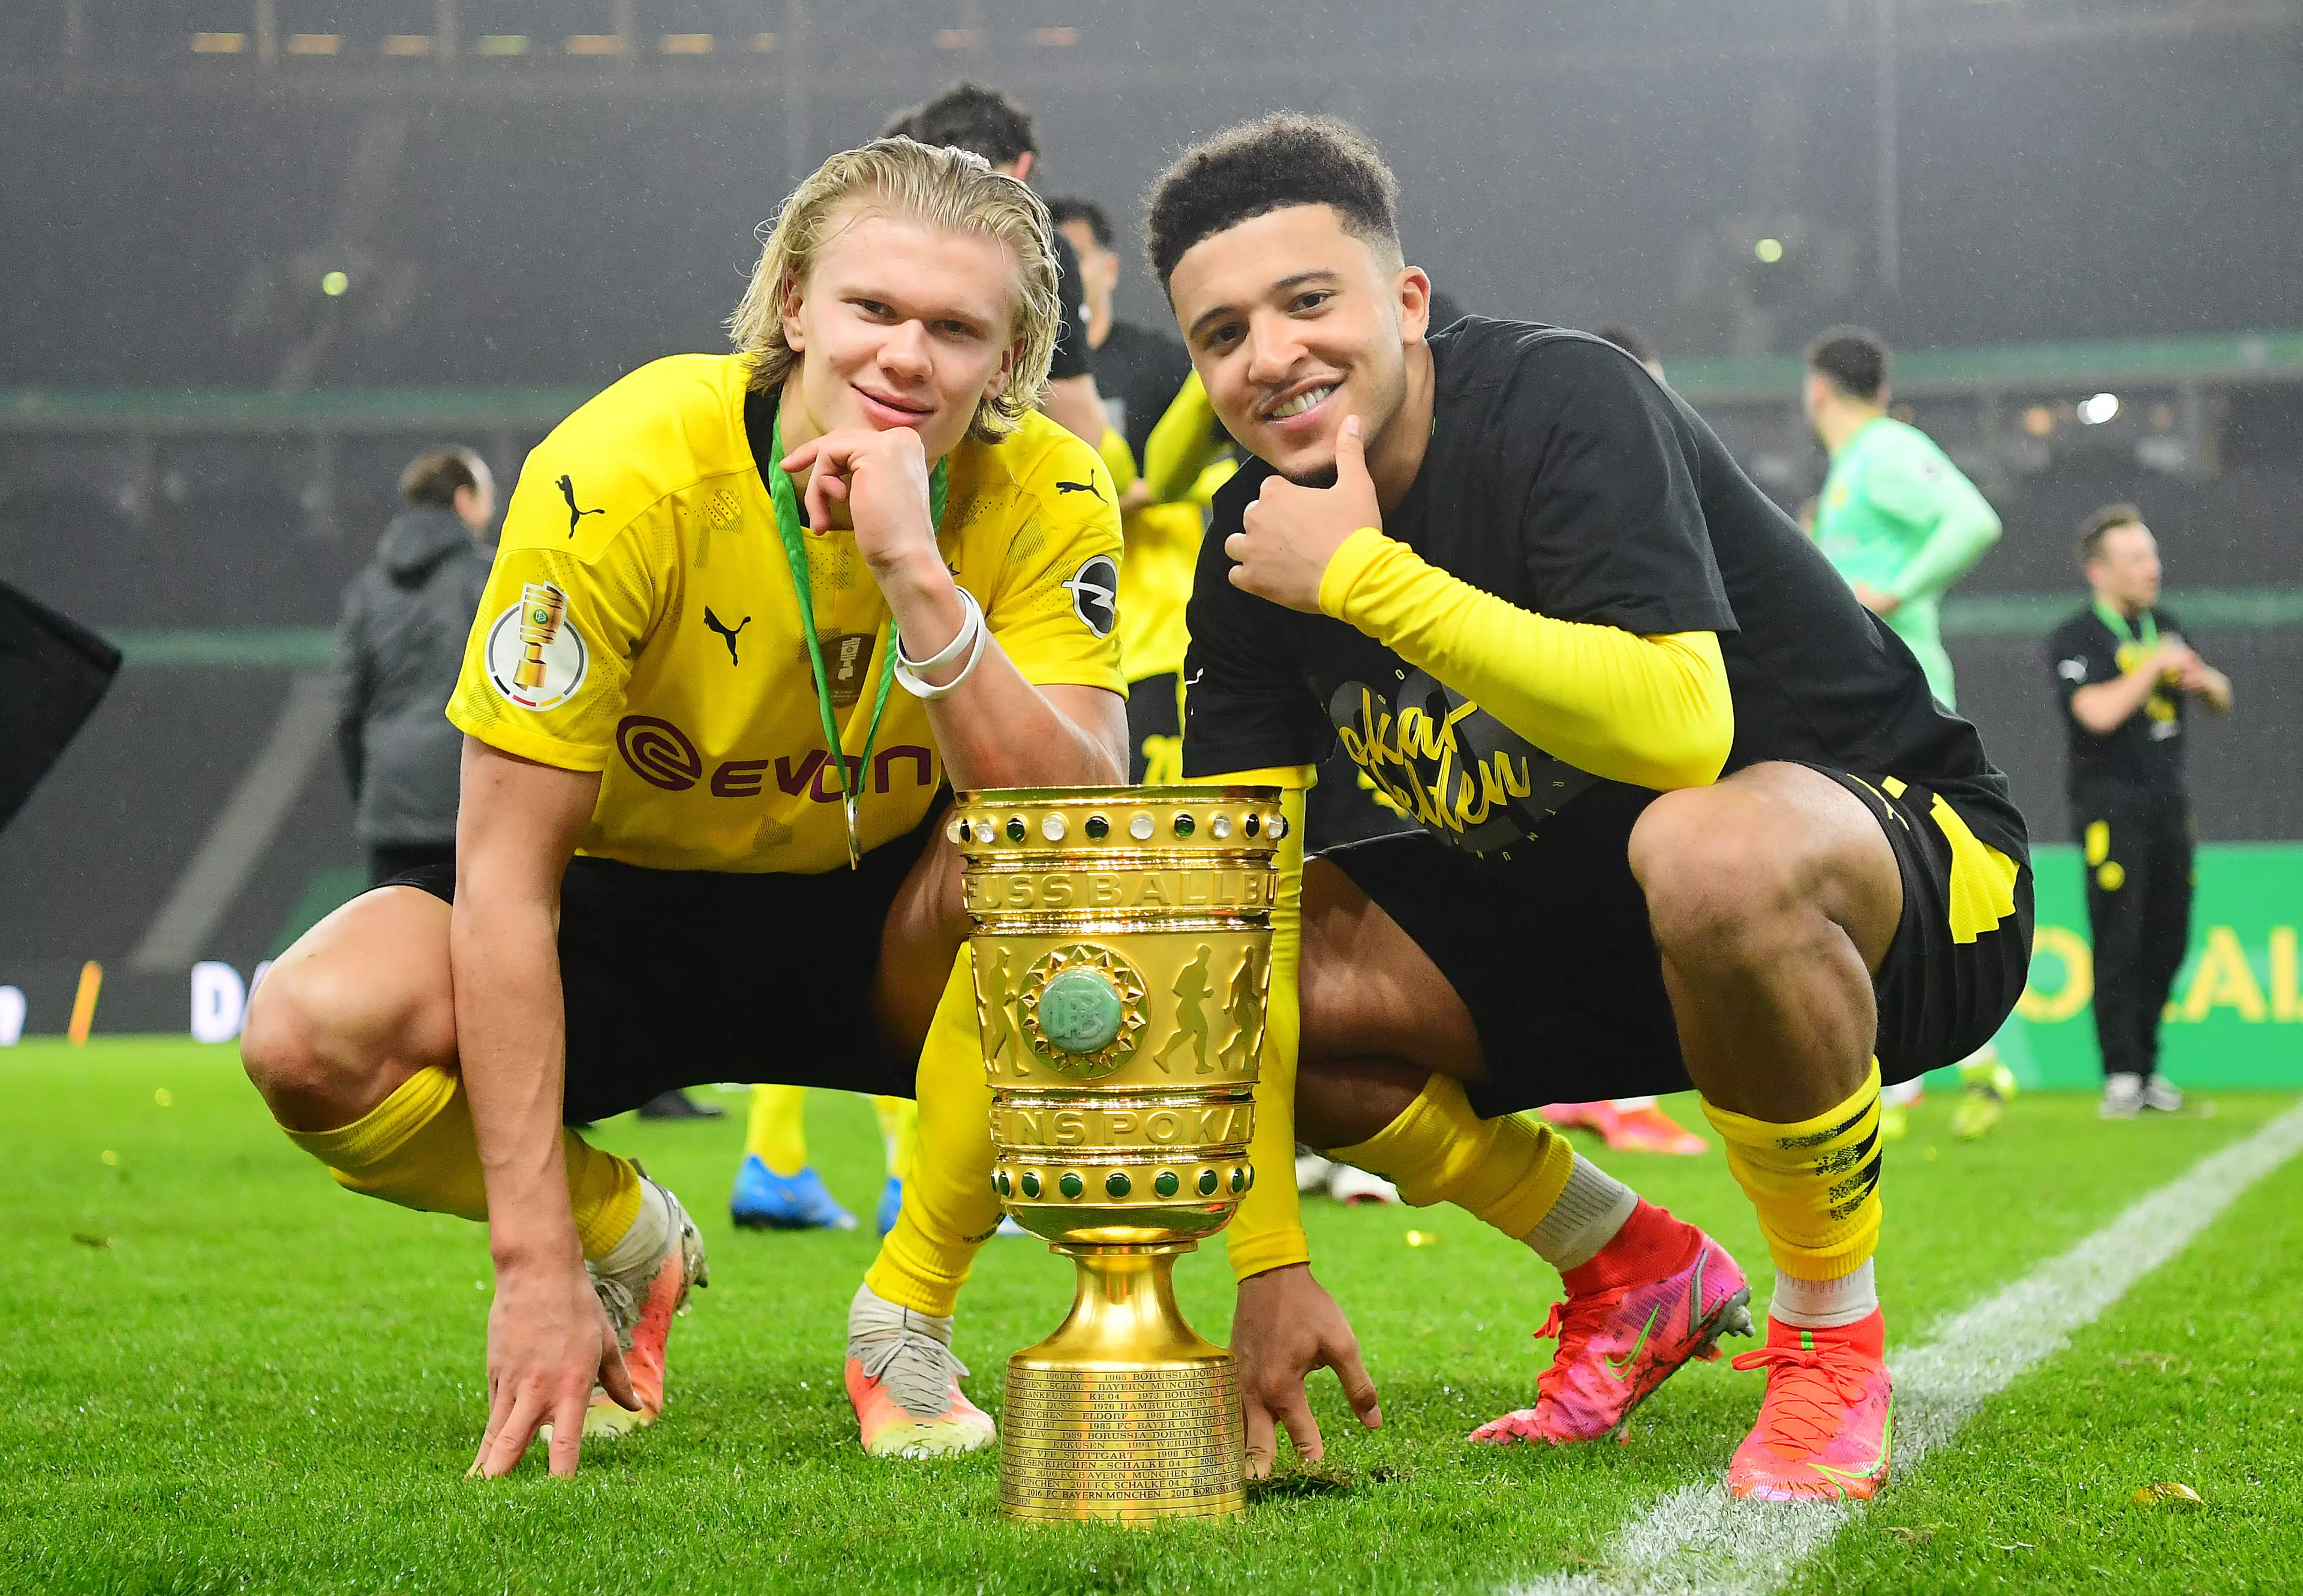 Numerous reports claim that Manchester United want to sign both Erling Haaland and Jadon Sancho